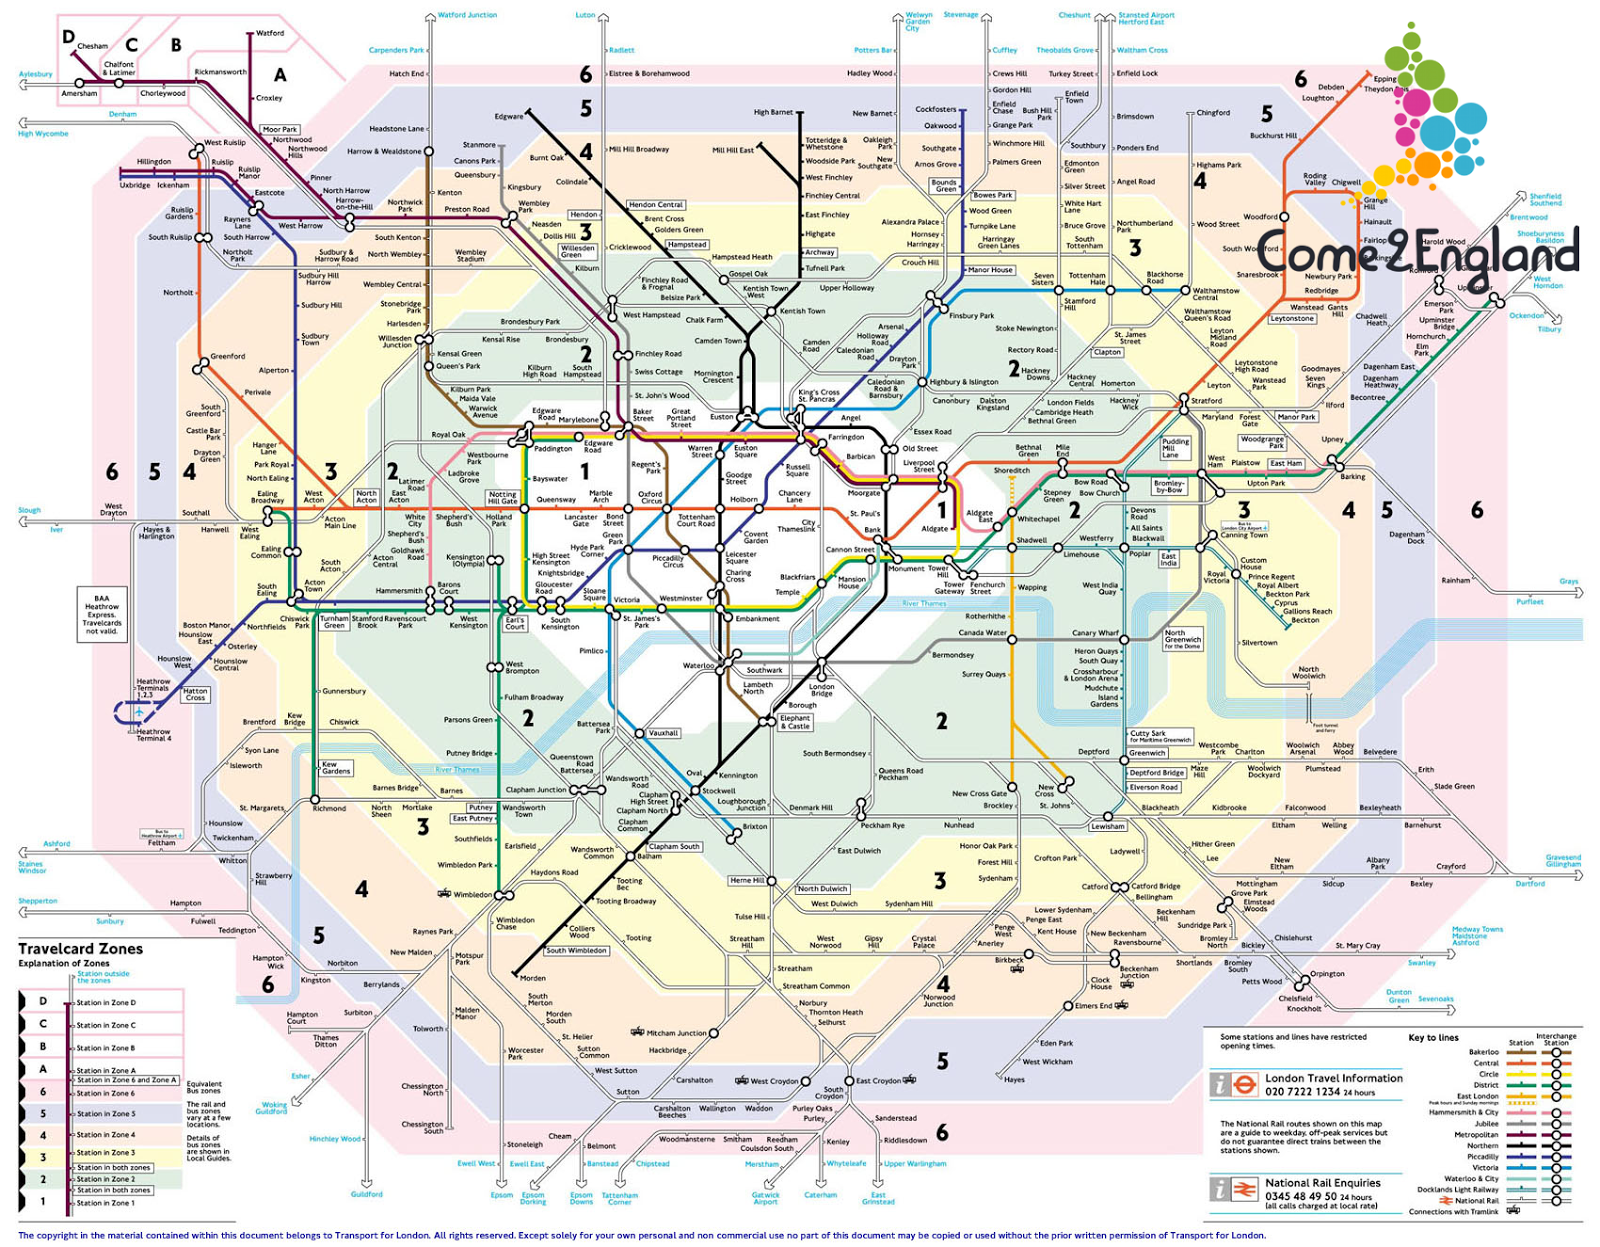 Work and Accommodation in London: Zones and look for accommodation in